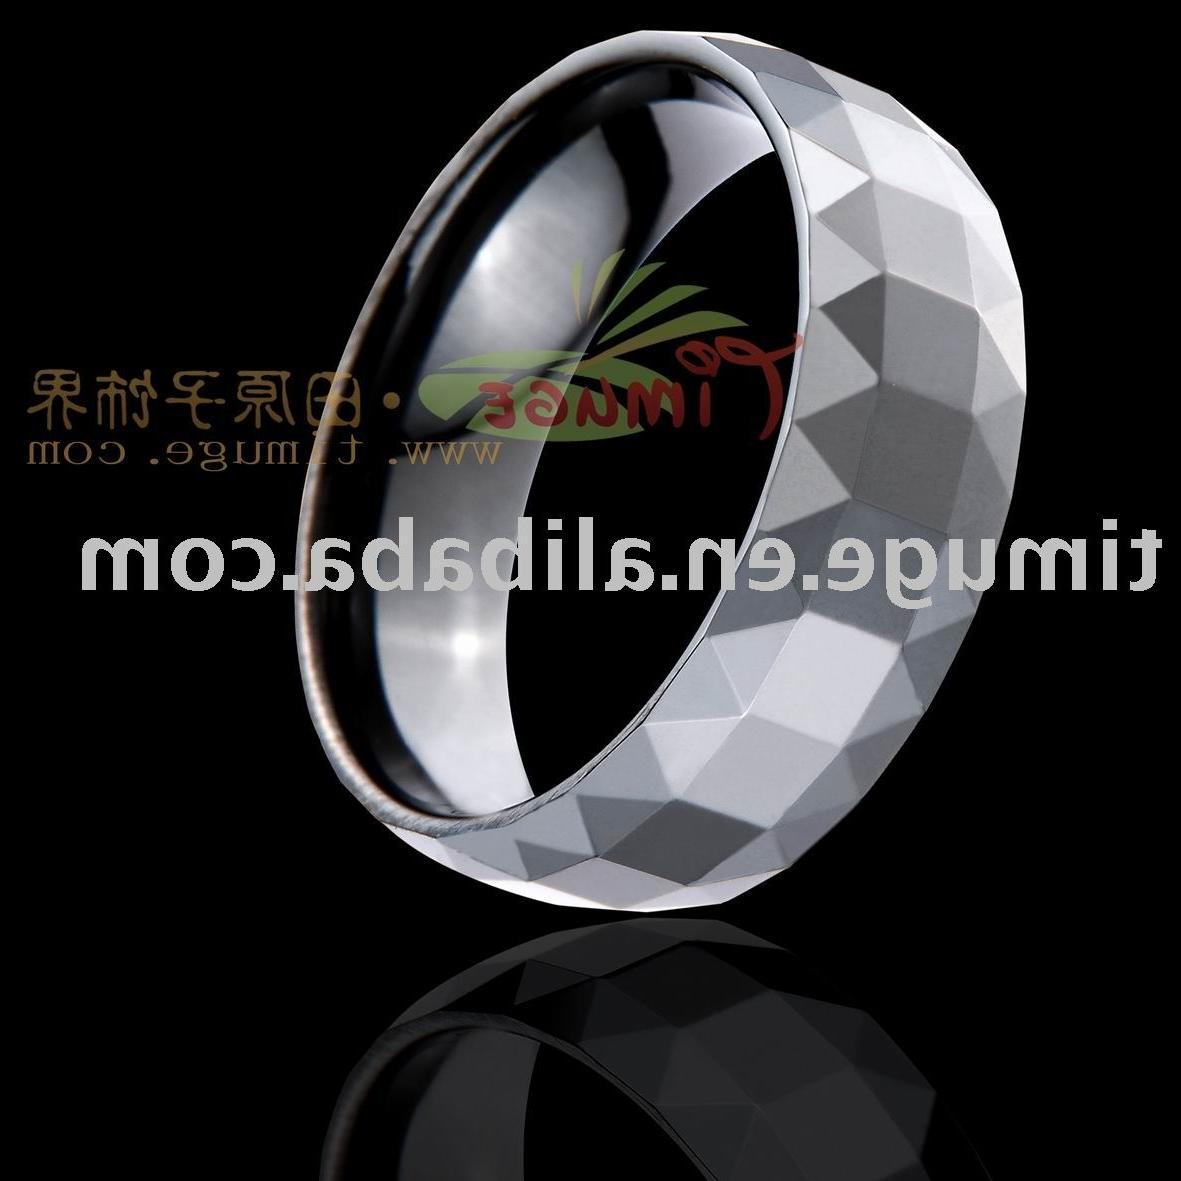 Ceramic rings, fashion ring, wedding rings. Inquire now